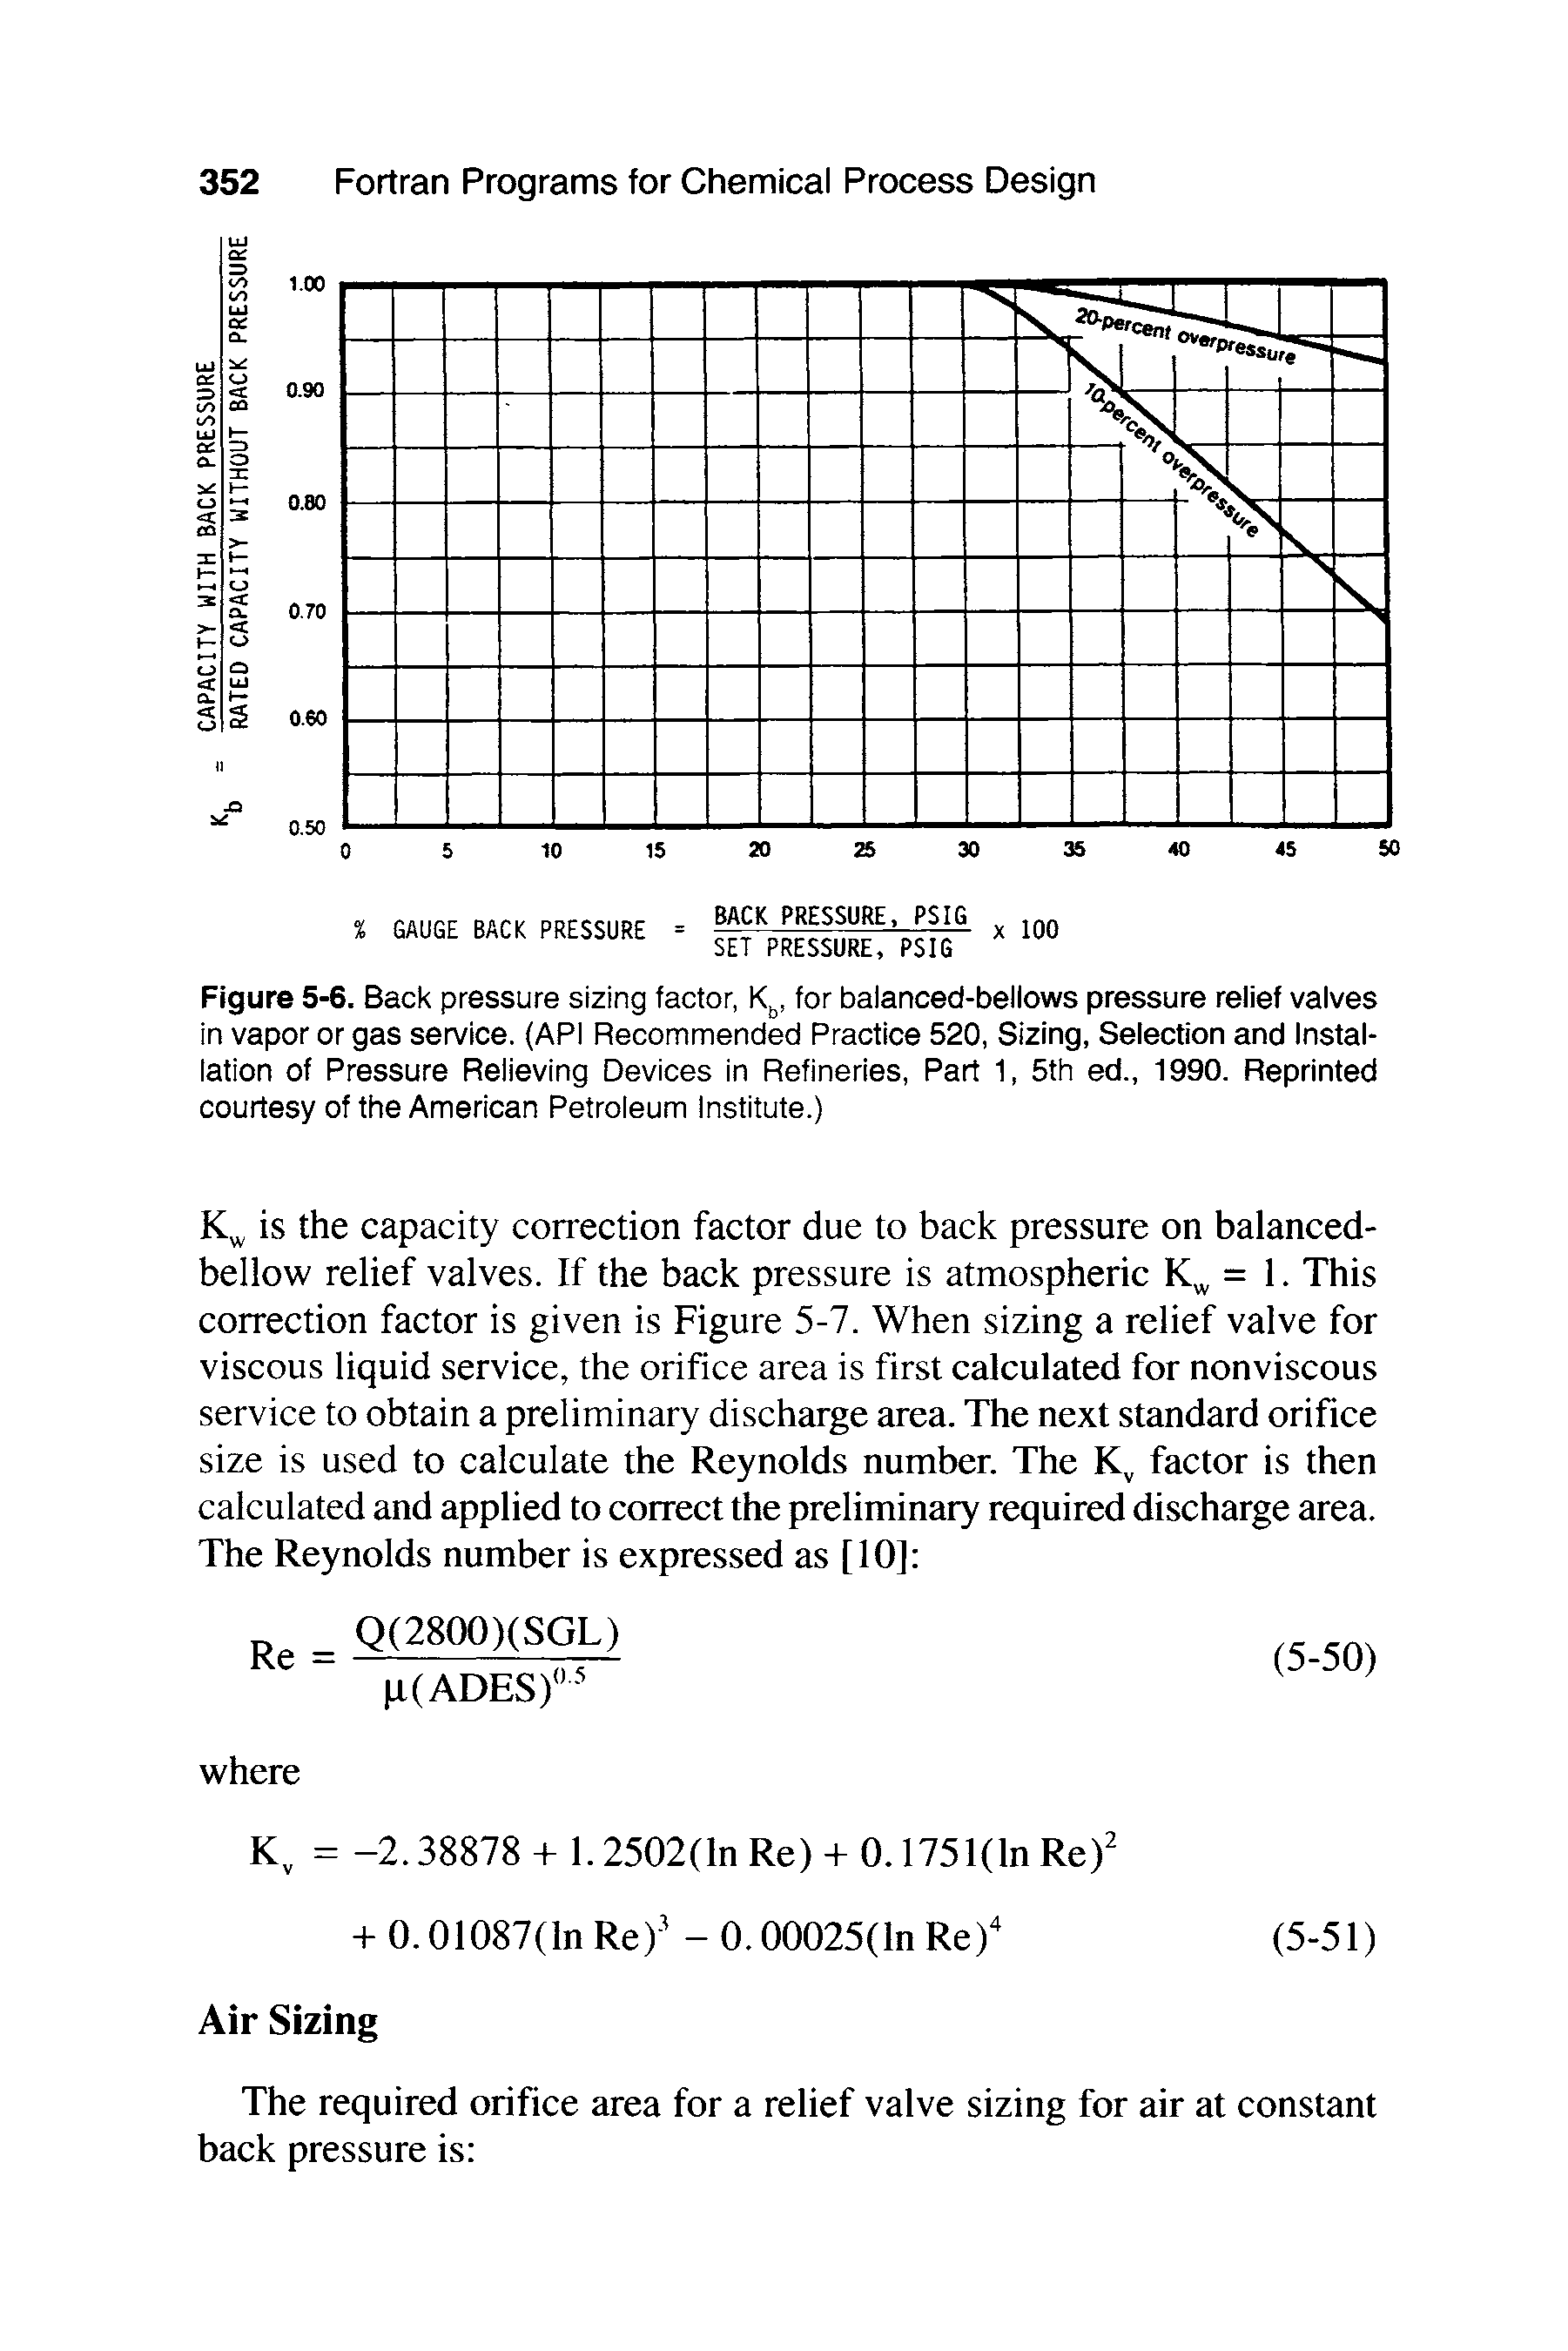 Figure 5-6. Back pressure sizing factor, K, for balanced-bellows pressure relief valves in vapor or gas service. (API Recommended Practice 520, Sizing, Selection and Installation of Pressure Relieving Devices in Refineries, Part 1, 5th ed., 1990. Reprinted courtesy of the American Petroleum Institute.)...